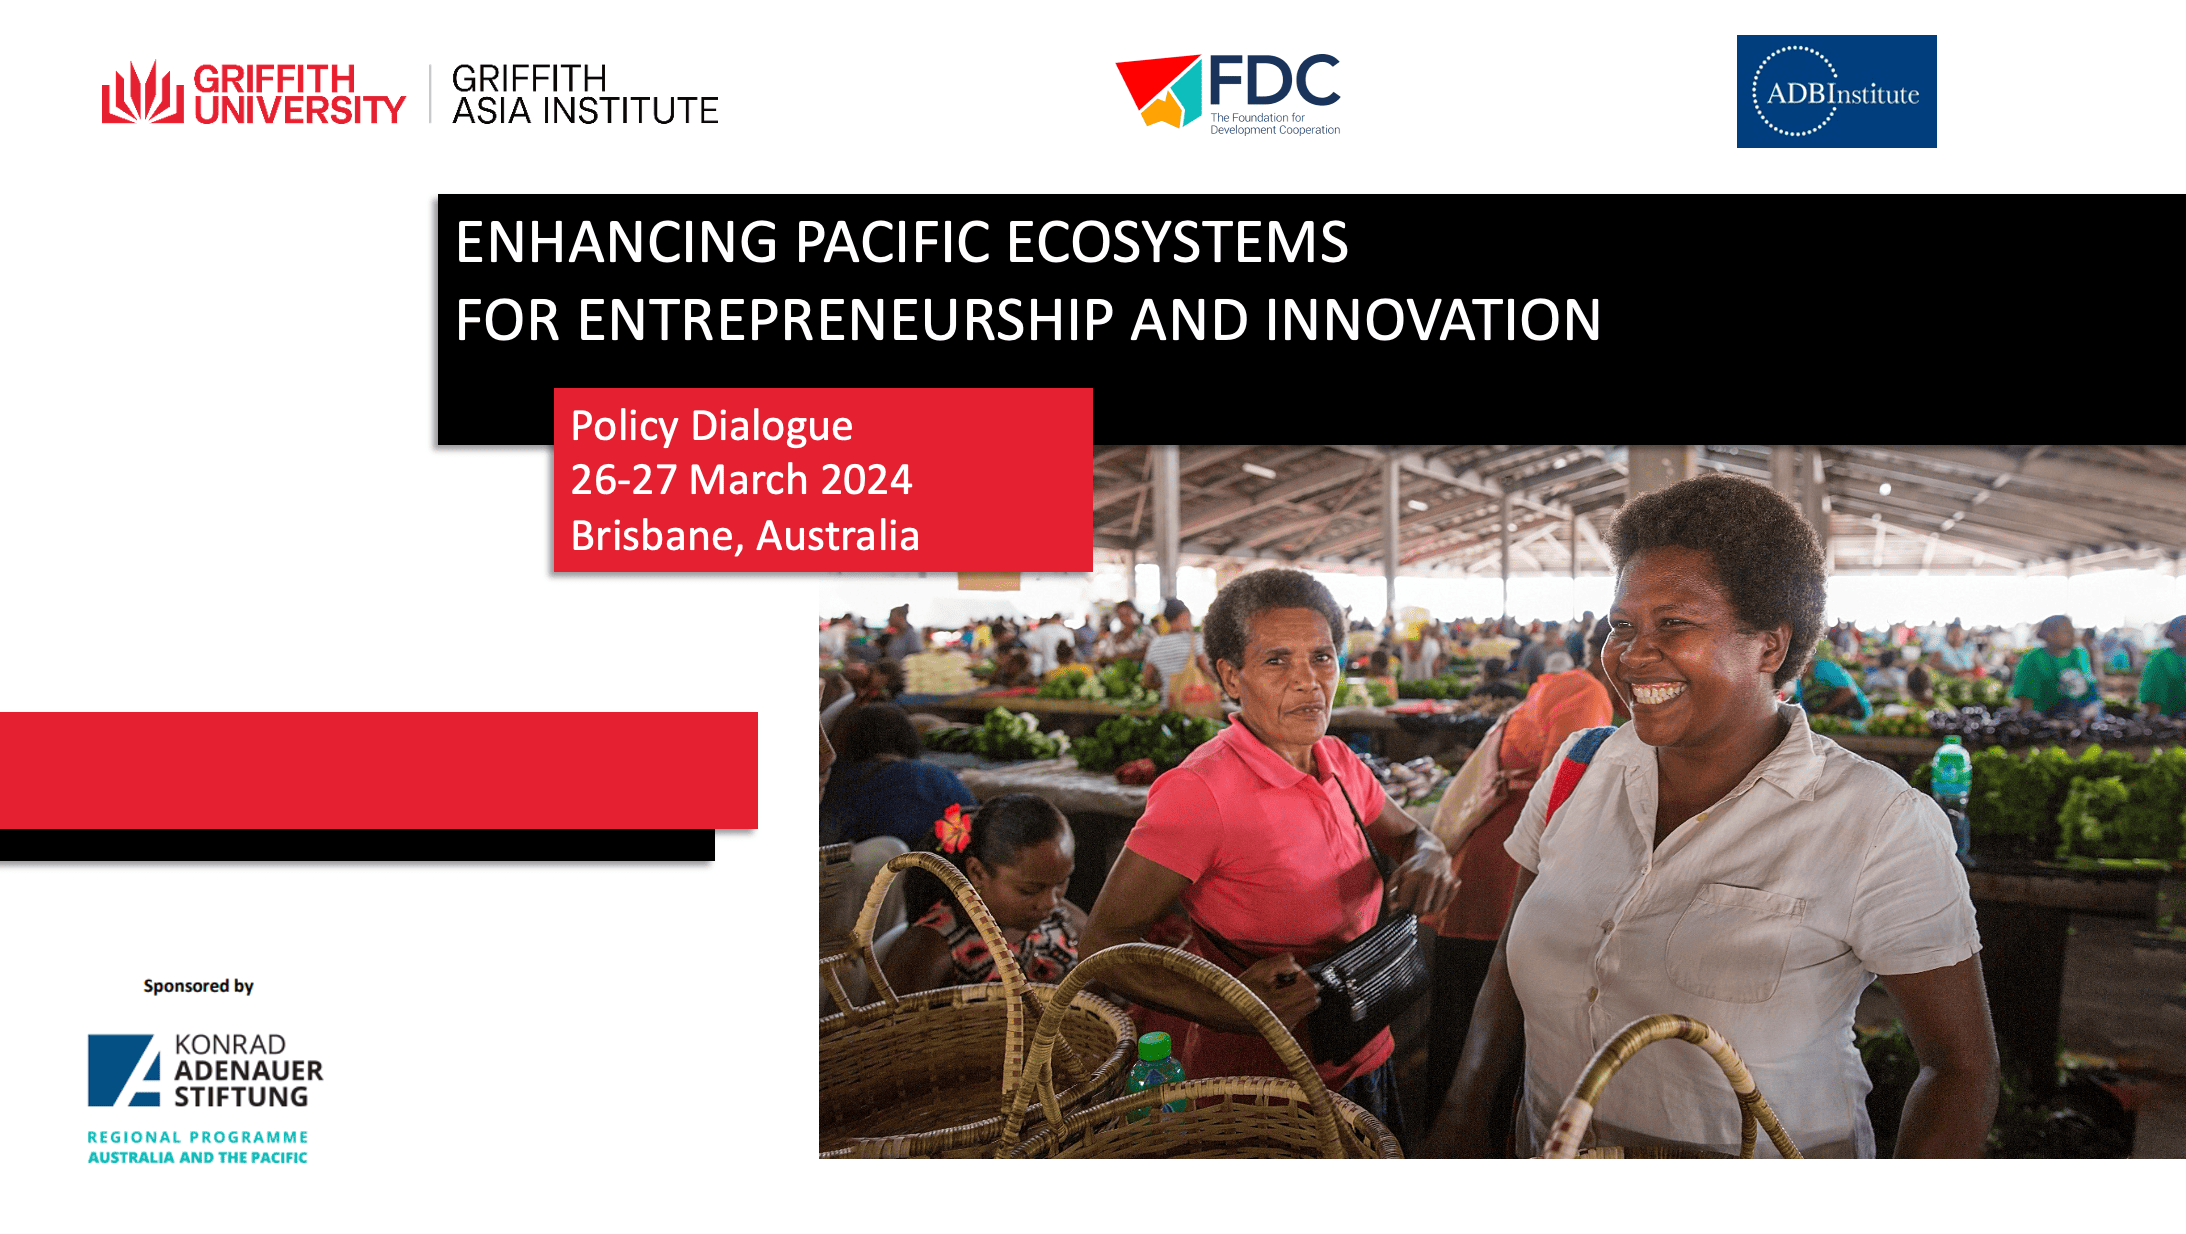 Enhancing Pacific Ecosystems for Entrepreneurship and Innovation